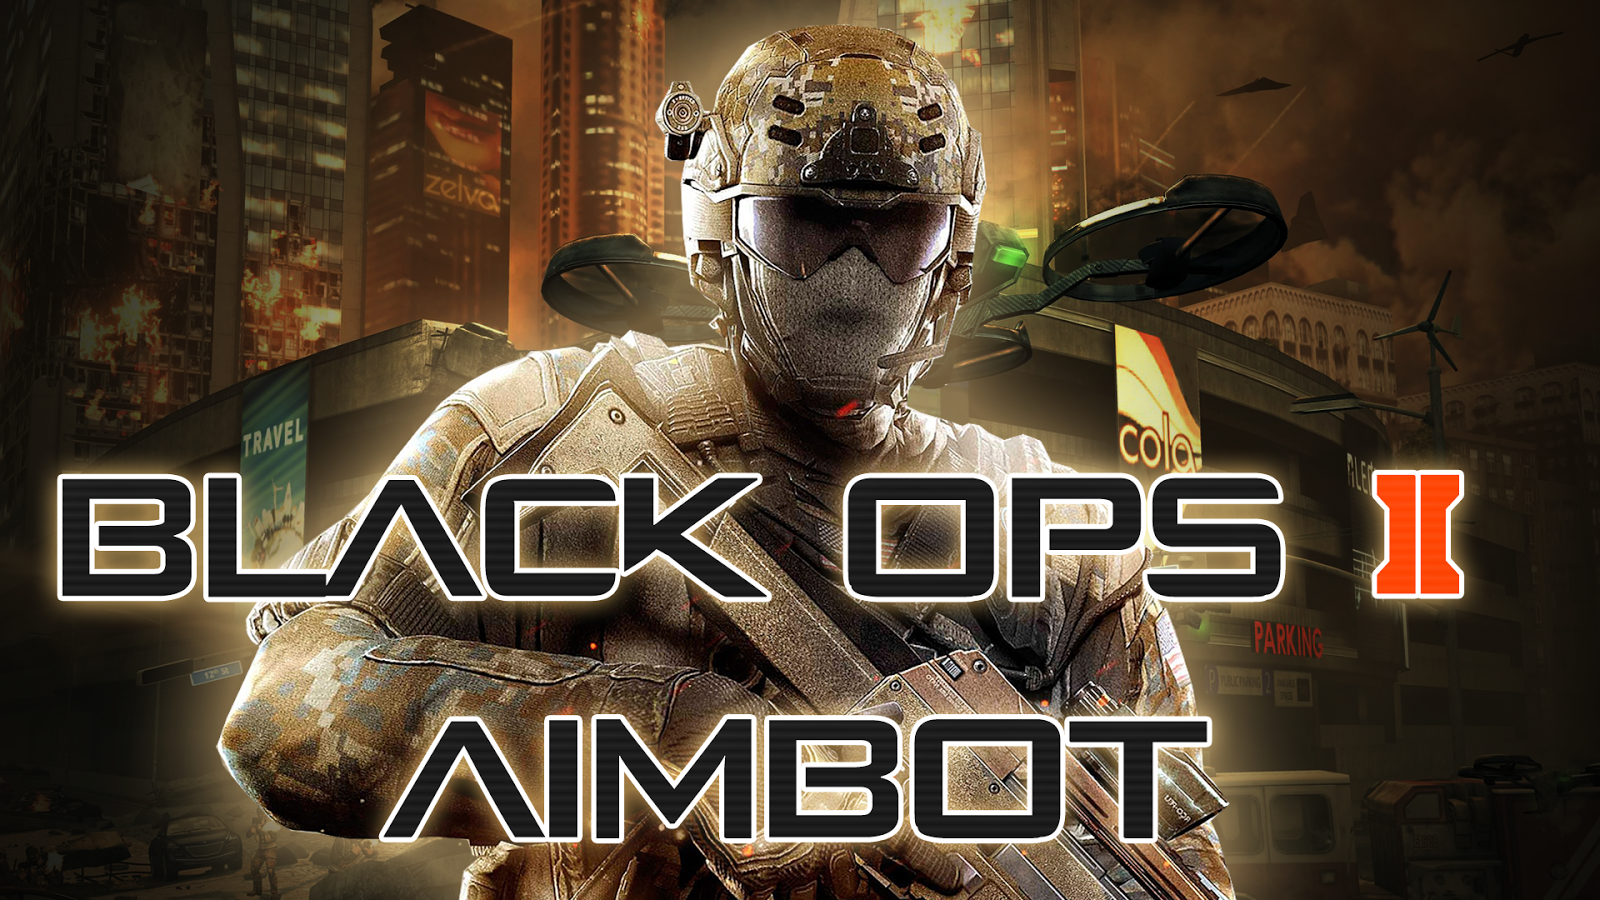 BO2 Official Aimbot: Black Ops 2 Aimbot - 1600 x 900 png 2052kB